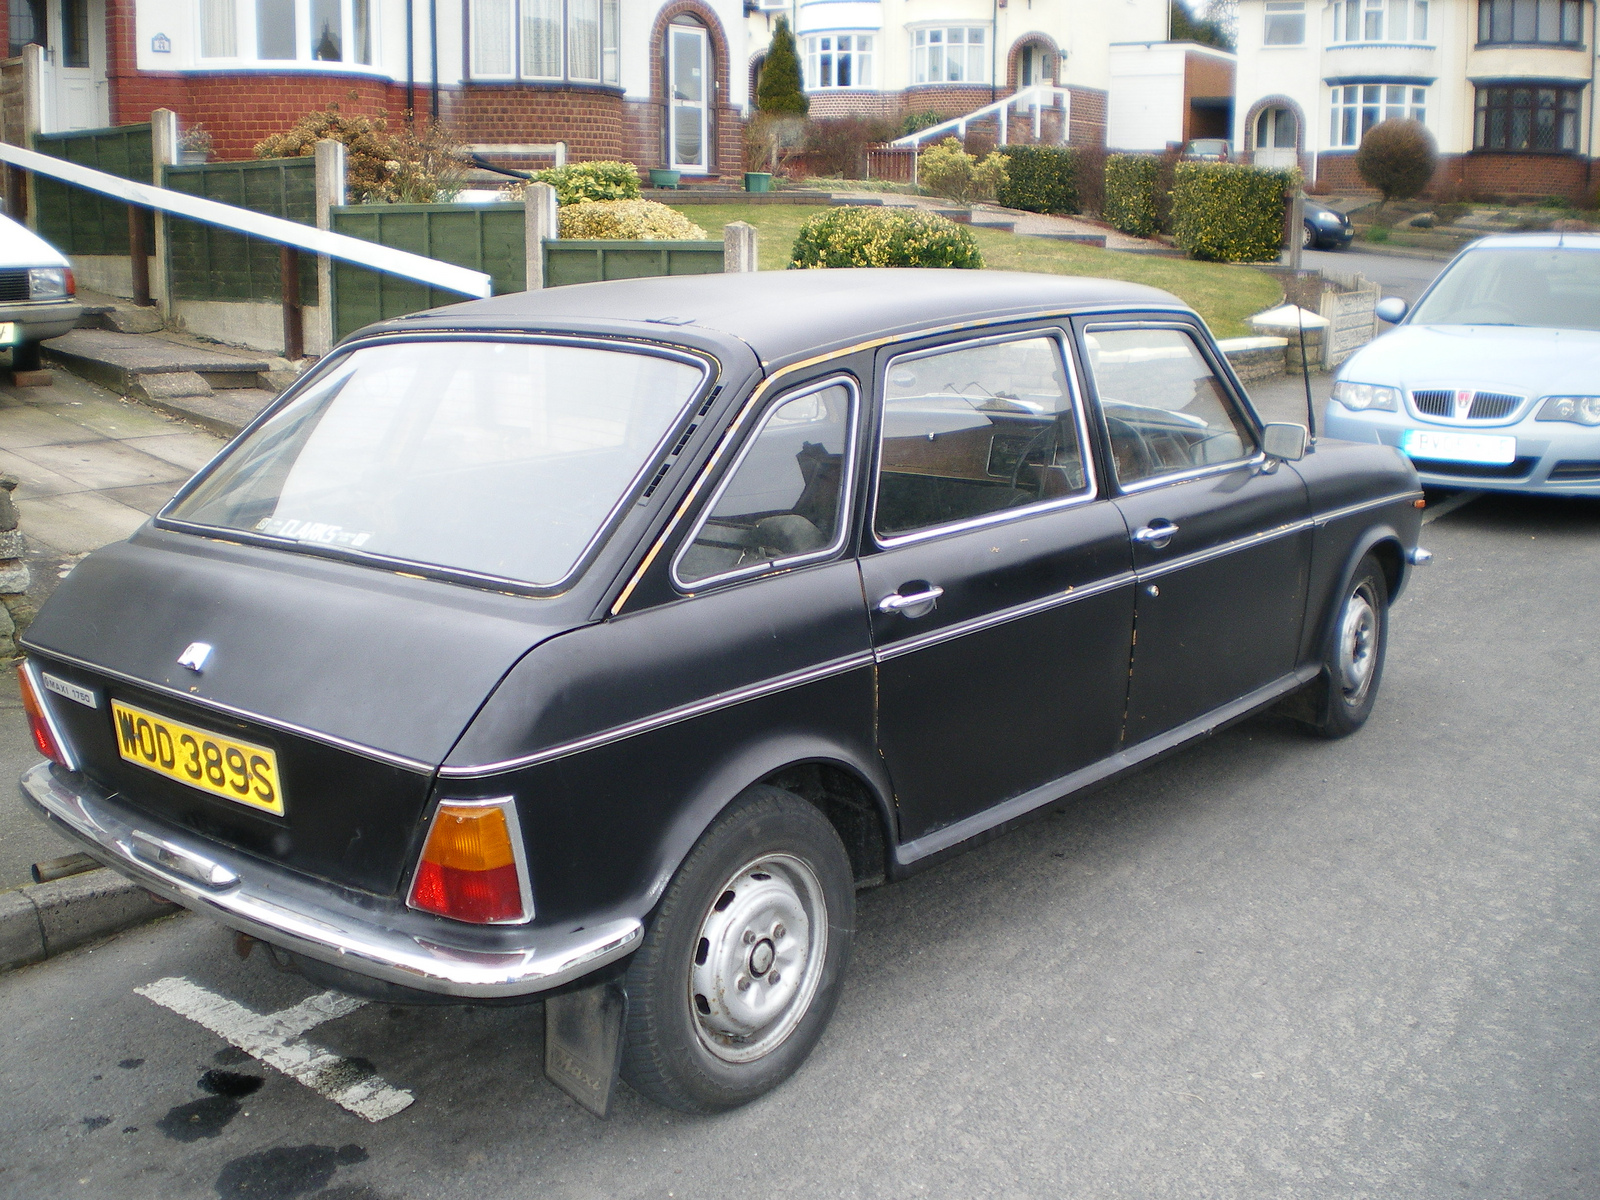 Austin Maxi rear quarter and oil leaks | Flickr - Photo Sharing!